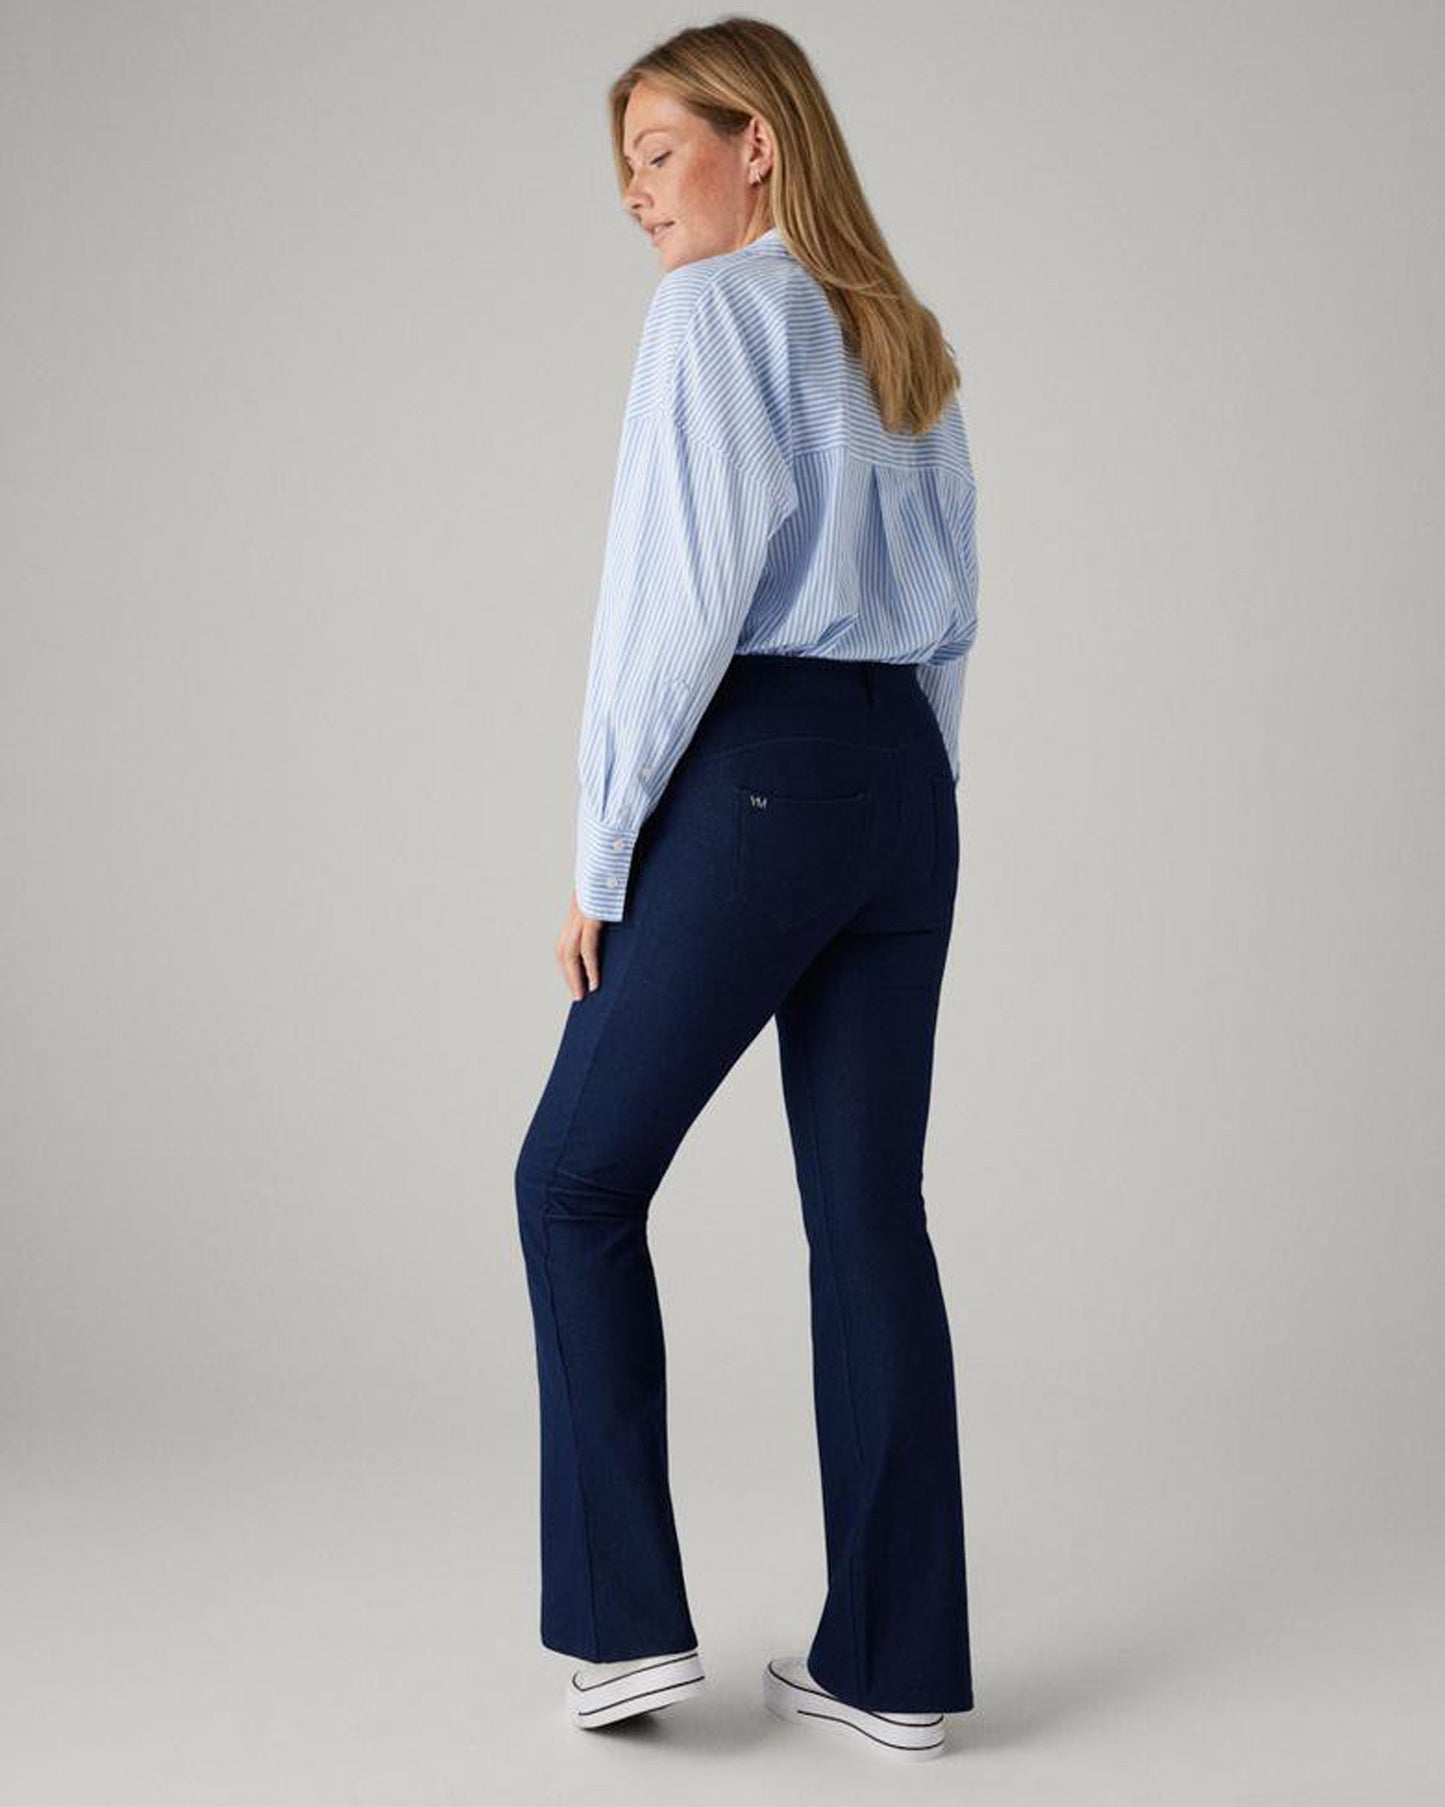 Ysabel Mora 70406 Flared Jeggings - Dark denim blue stretch high rise leggings with a flared boot leg, back pockets, belt loops and faux front pockets and fly top stitching.